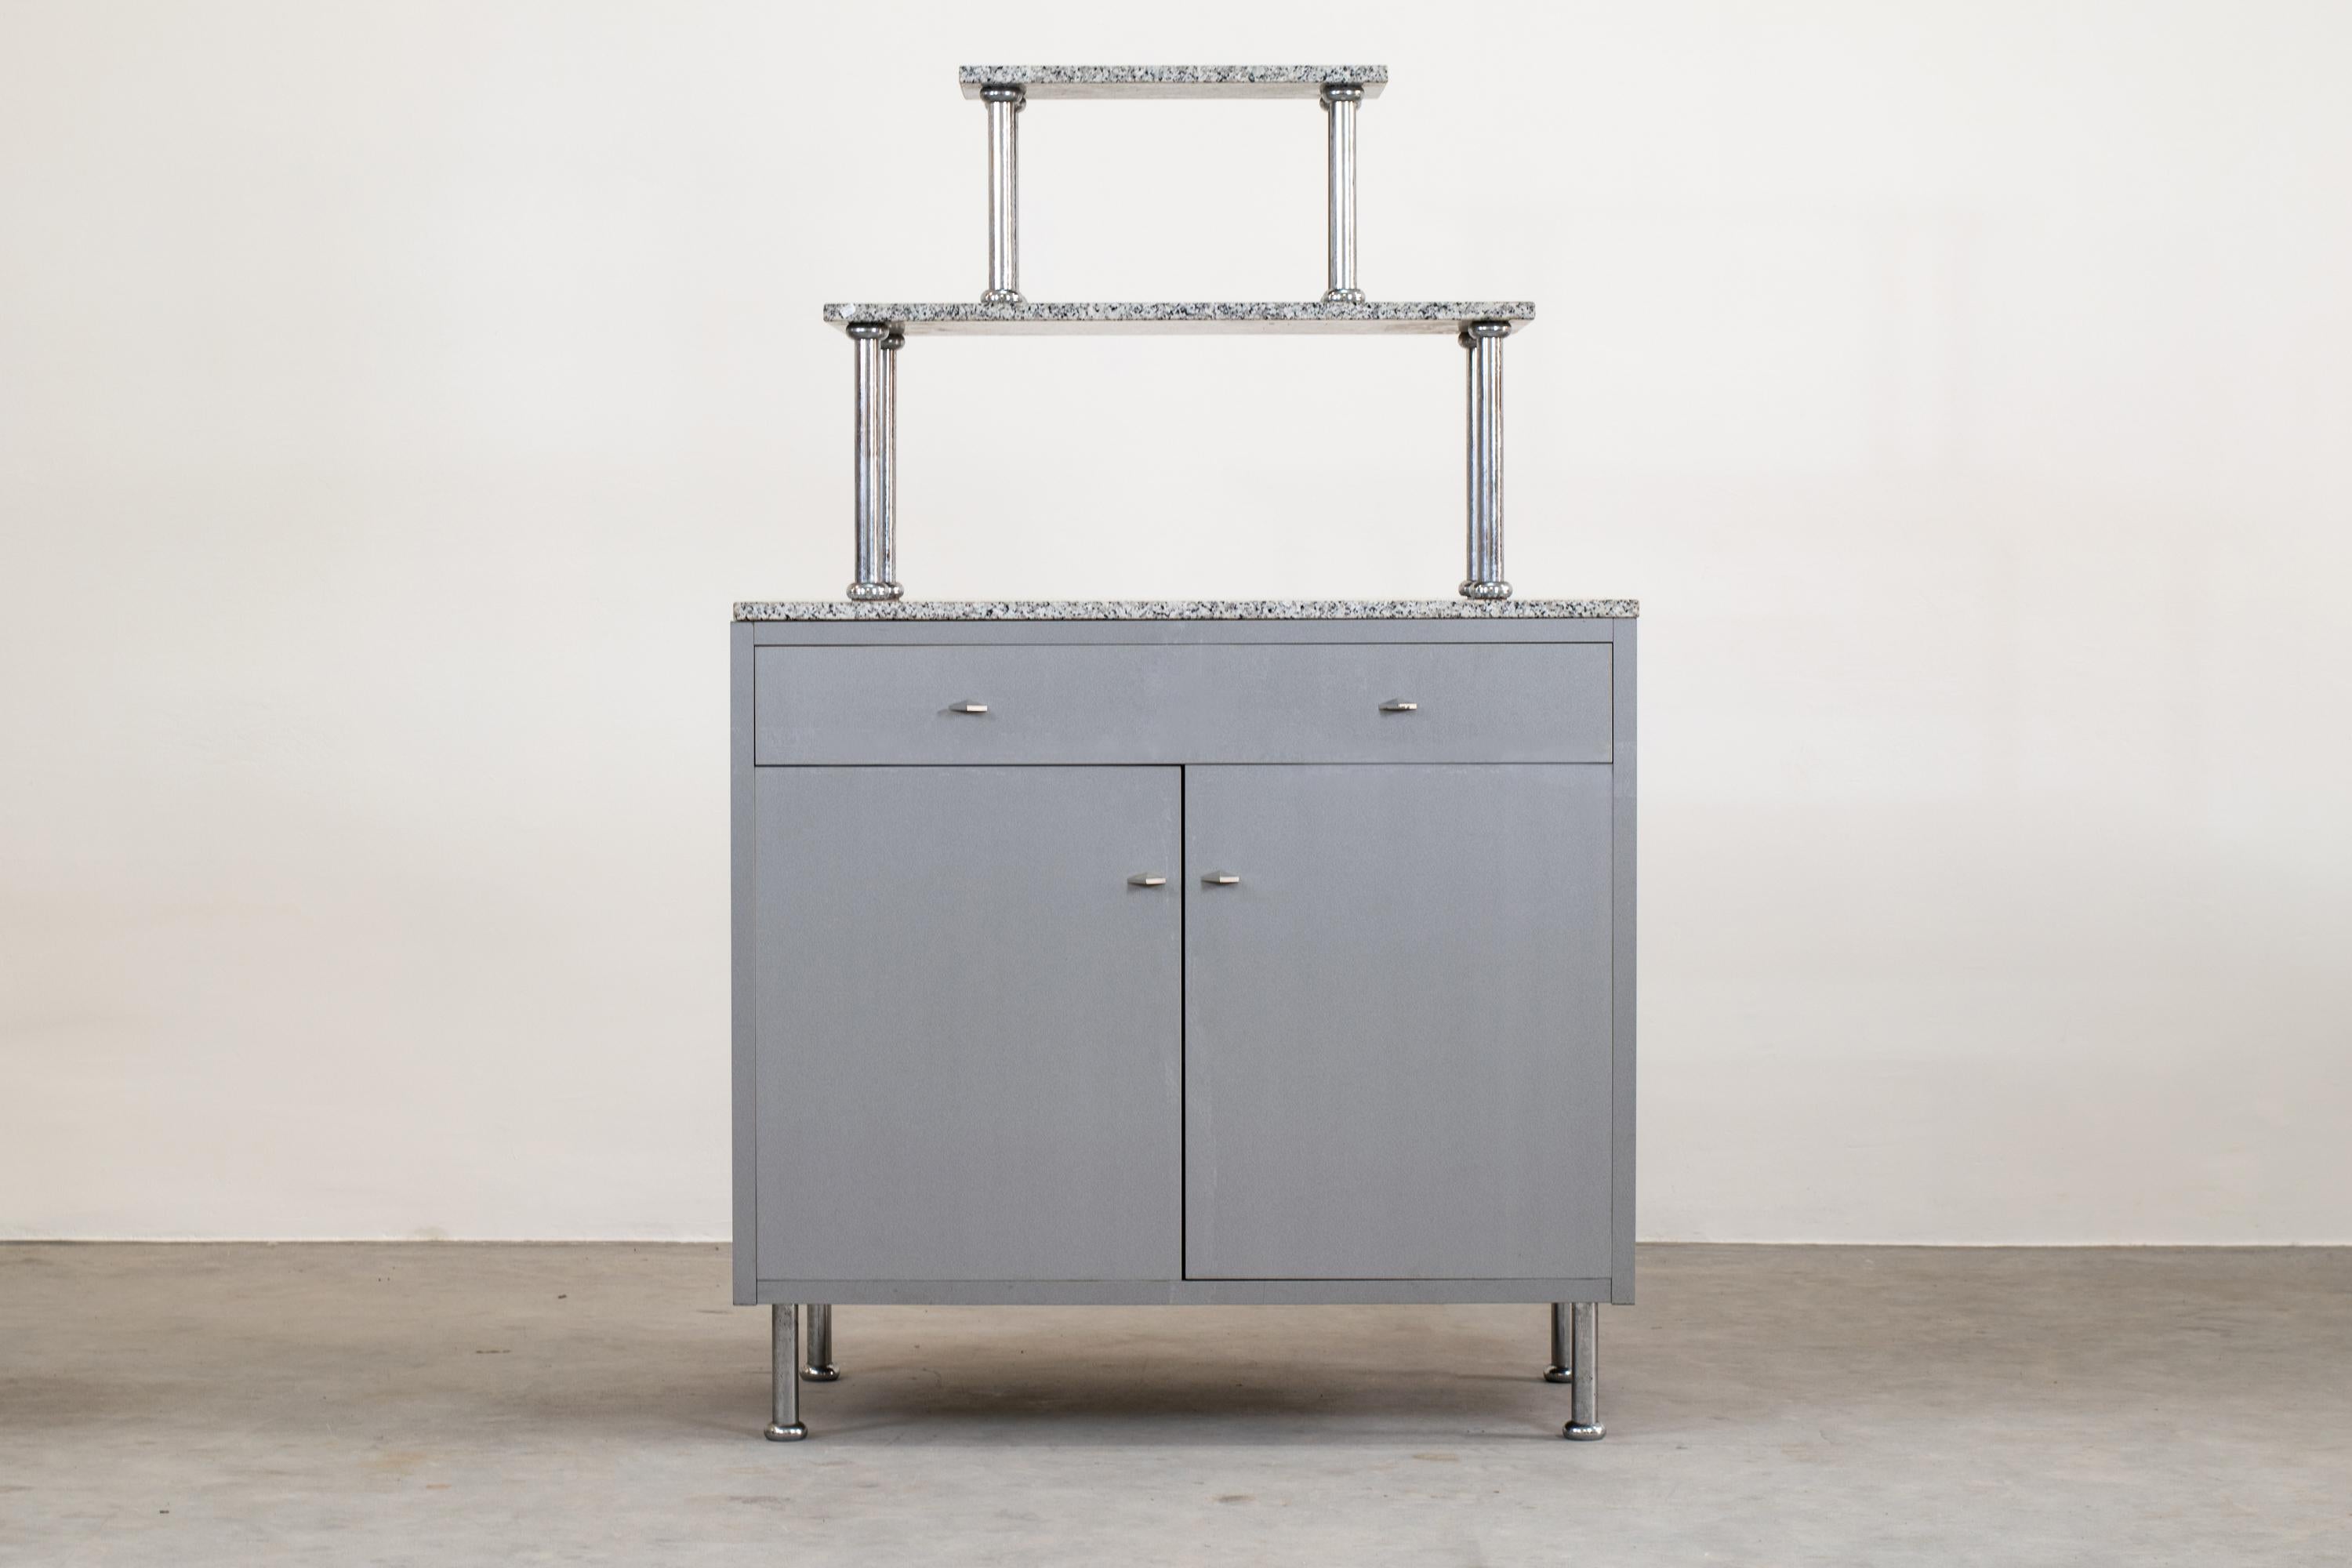 Cabinet with two doors, inner shelves, and drawers from the Afrorismi series, it's made in gray metalized and grooved laminate, with legs and upper support in chromed metal, and overlapping shelves in Baveno granite.

Produced by Driade in 1984,